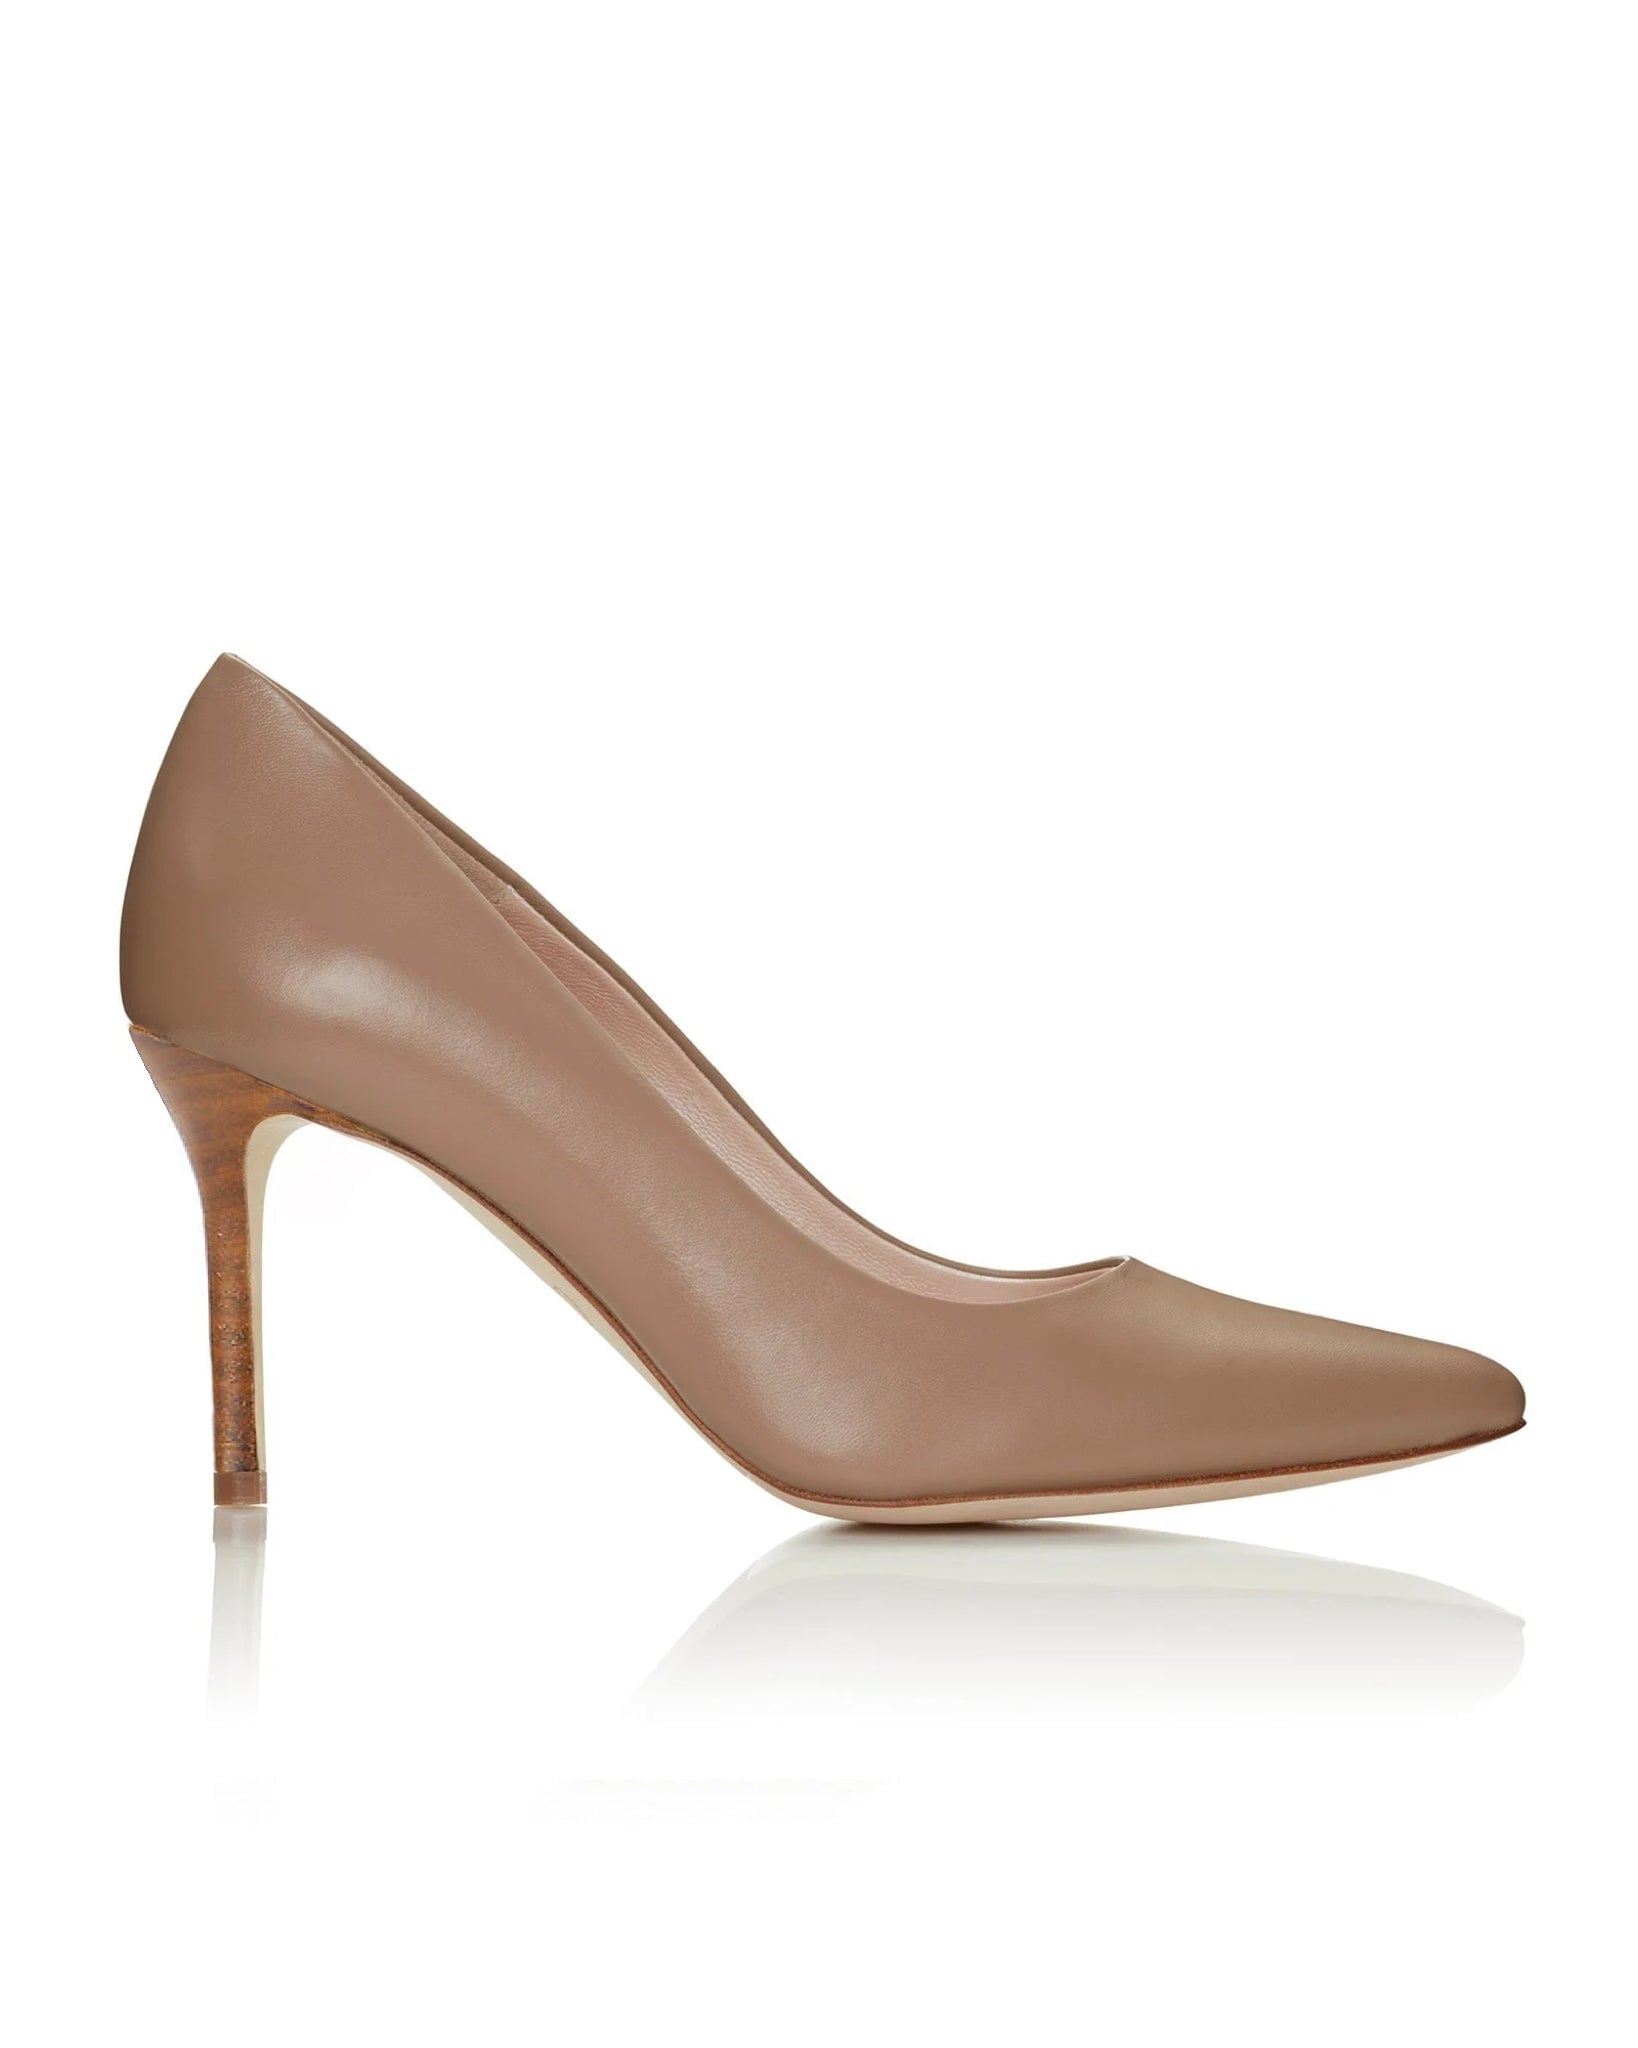 Claudia Mid Heel Fashion Shoe Nude Leather Pointed Court Shoe  image